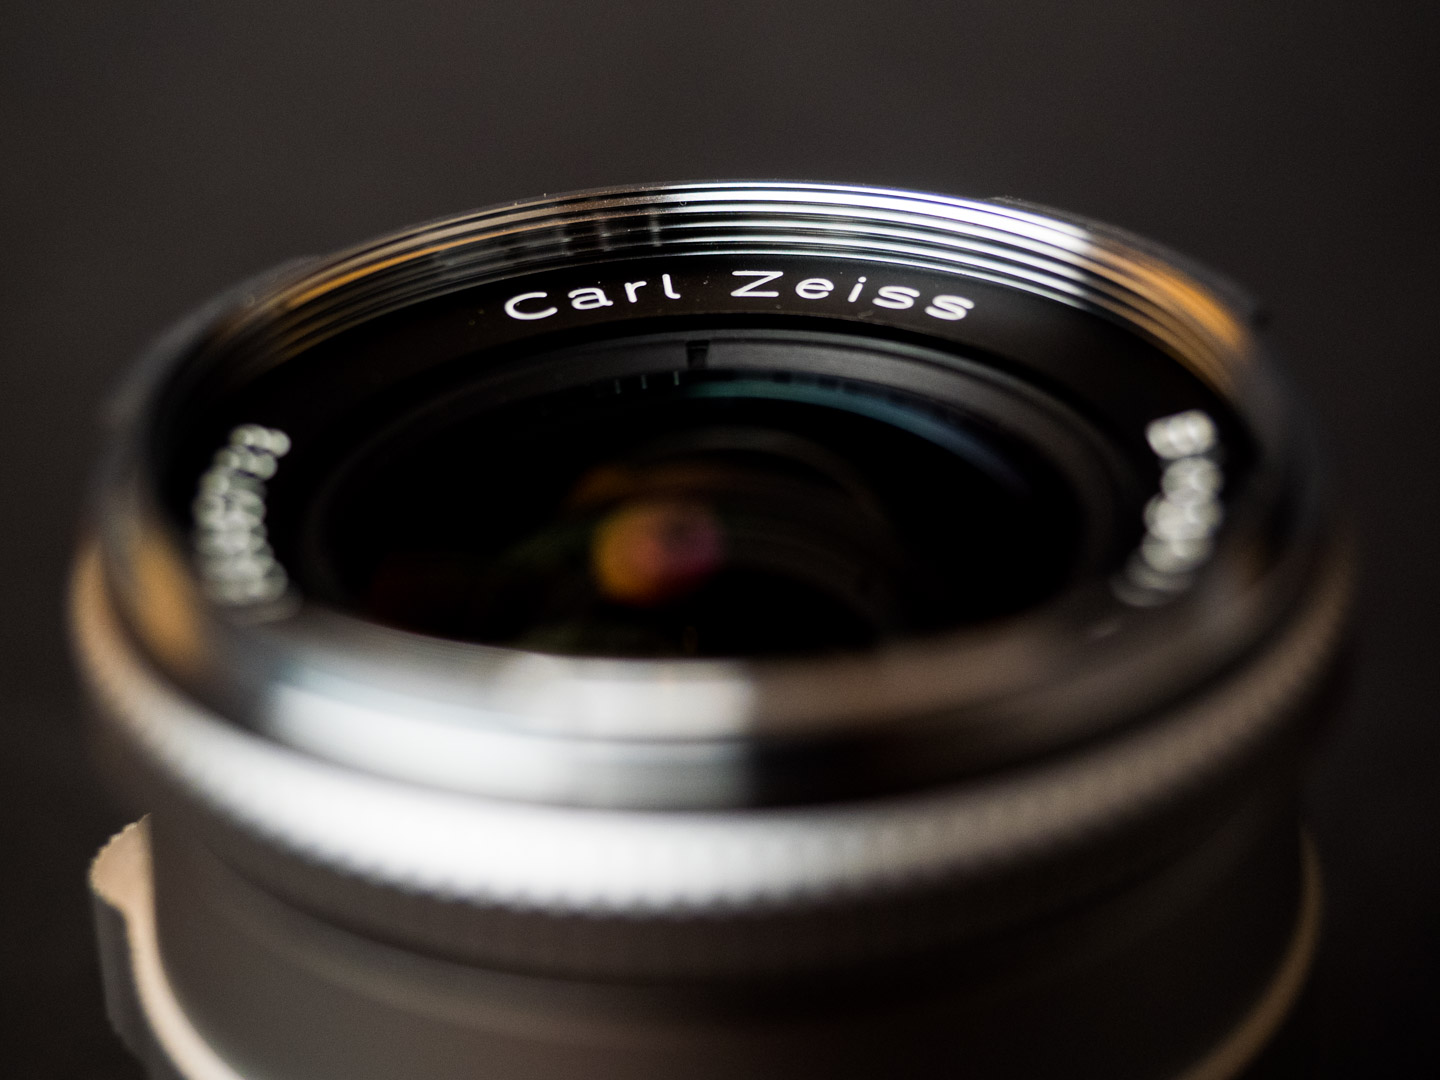 Is a Zeiss photo market exit only a rumour? Here is the answer